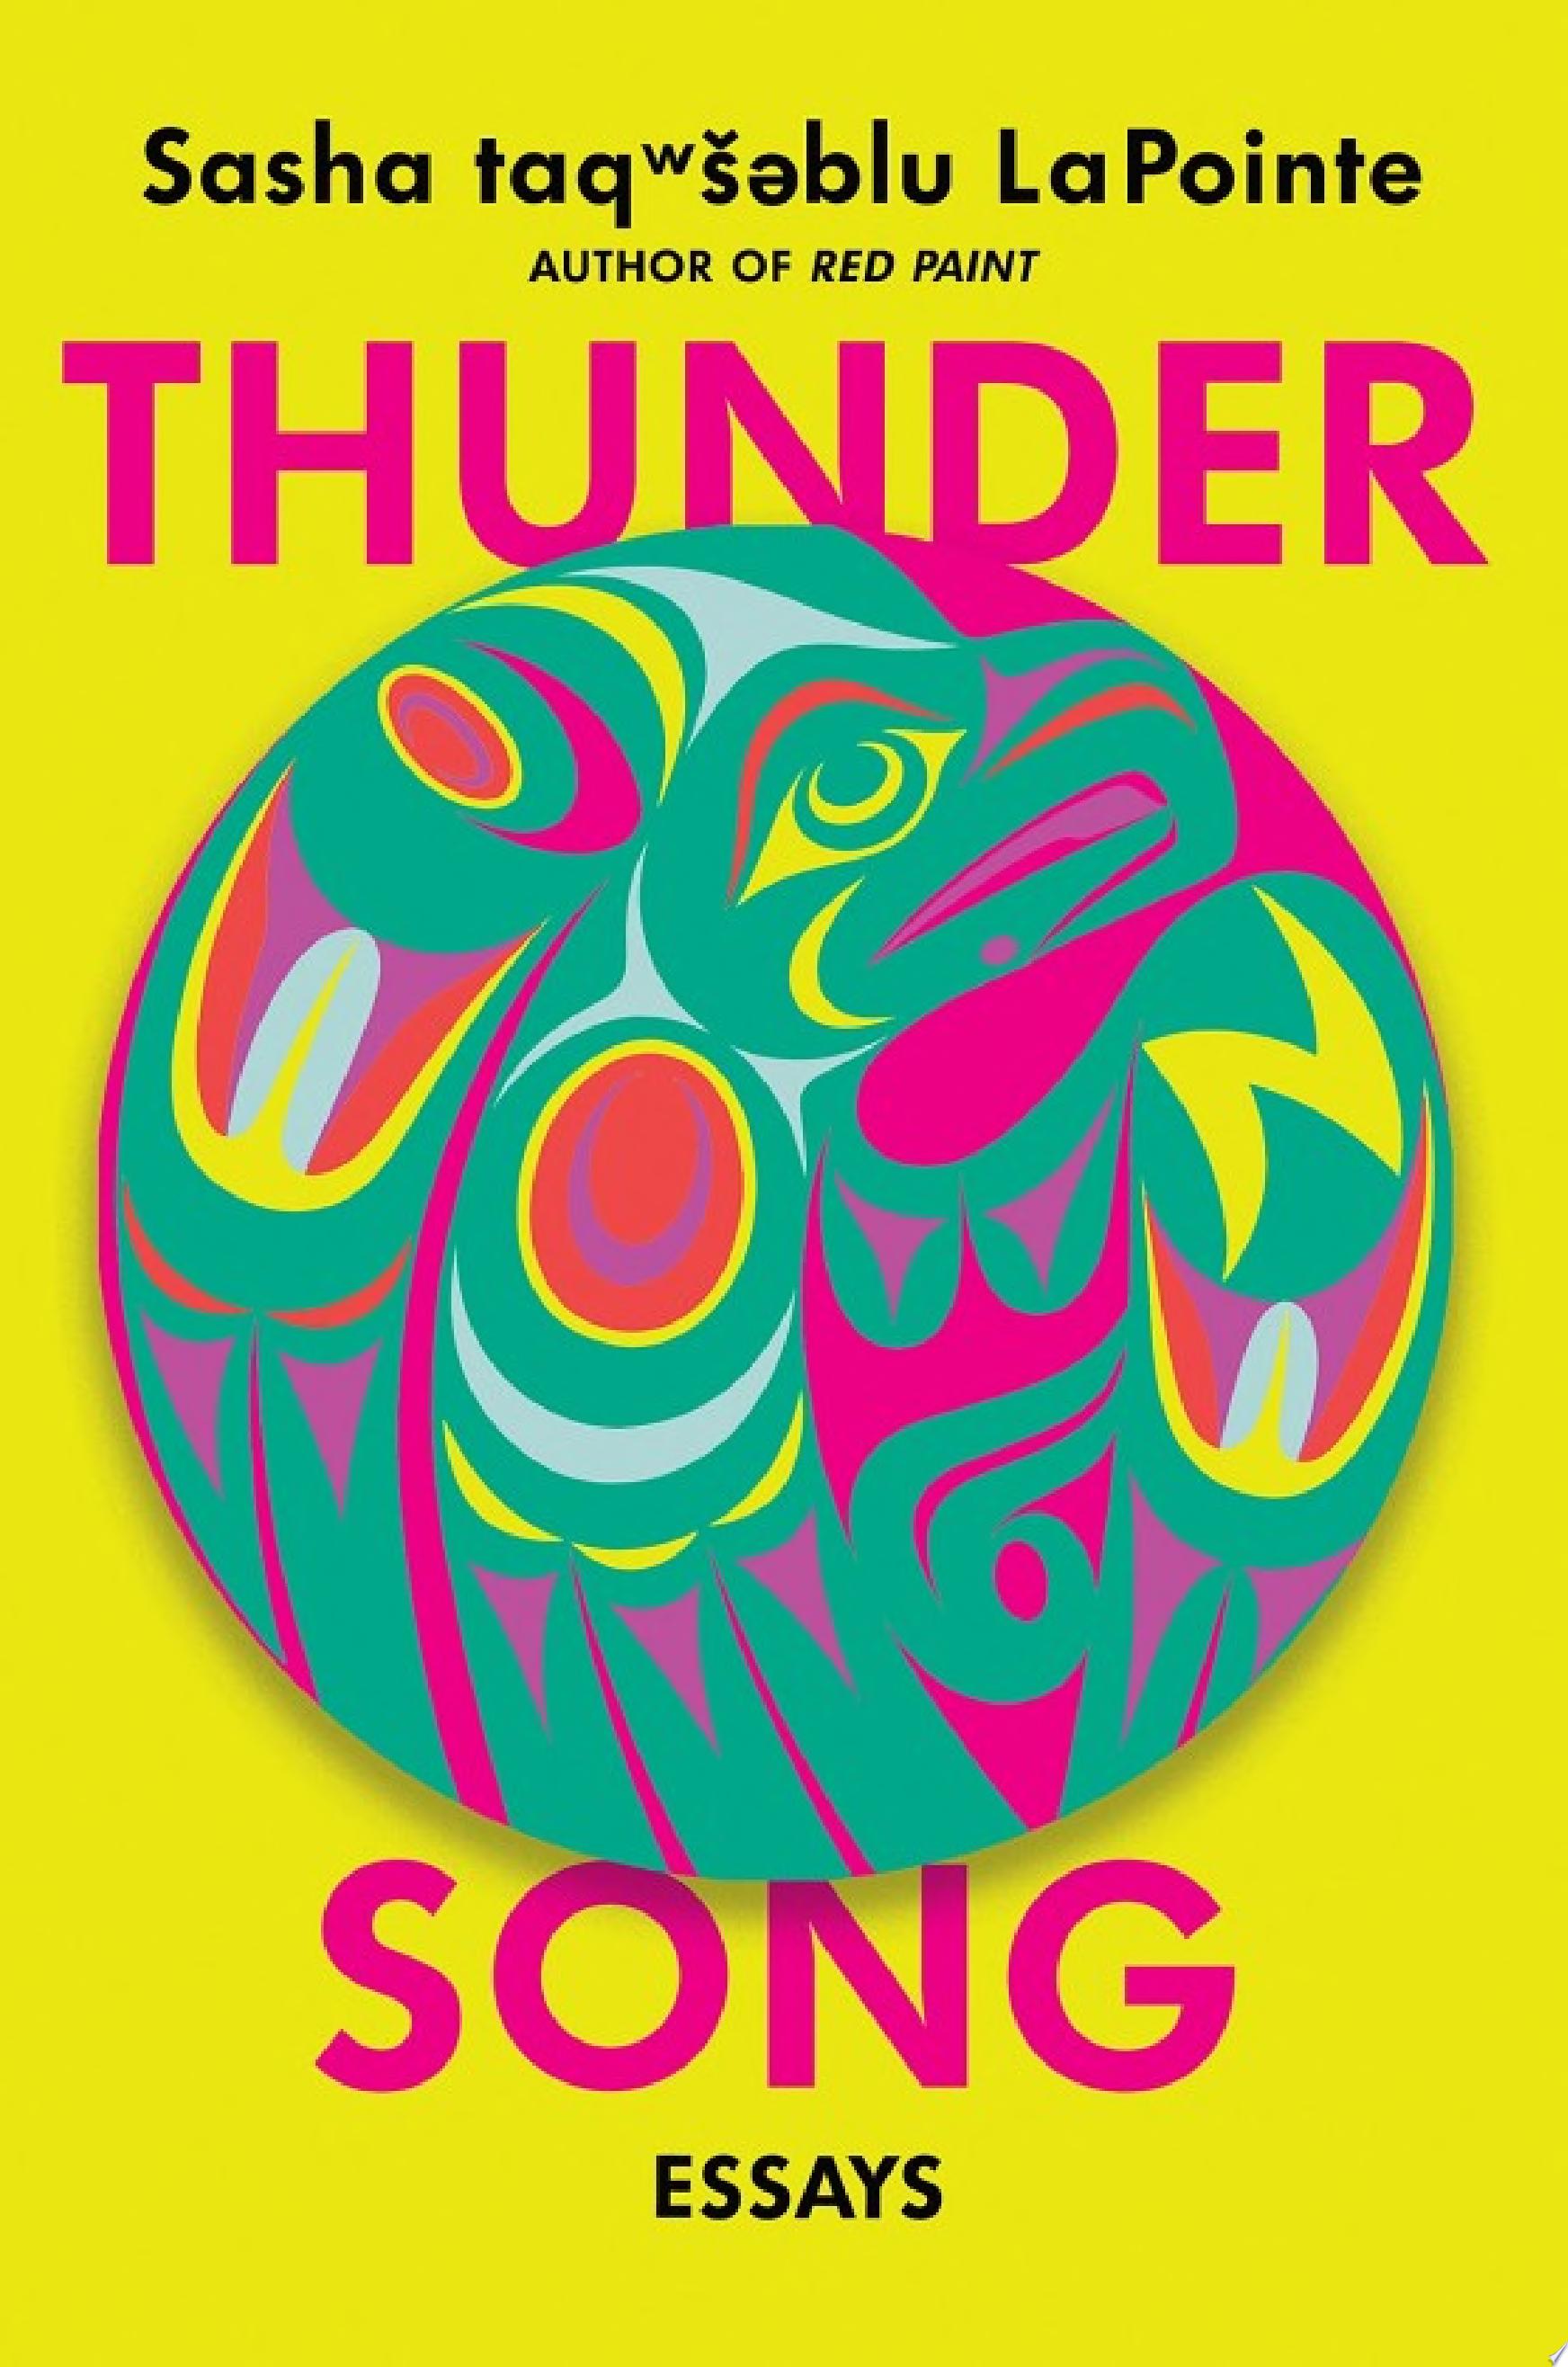 Image for "Thunder Song"